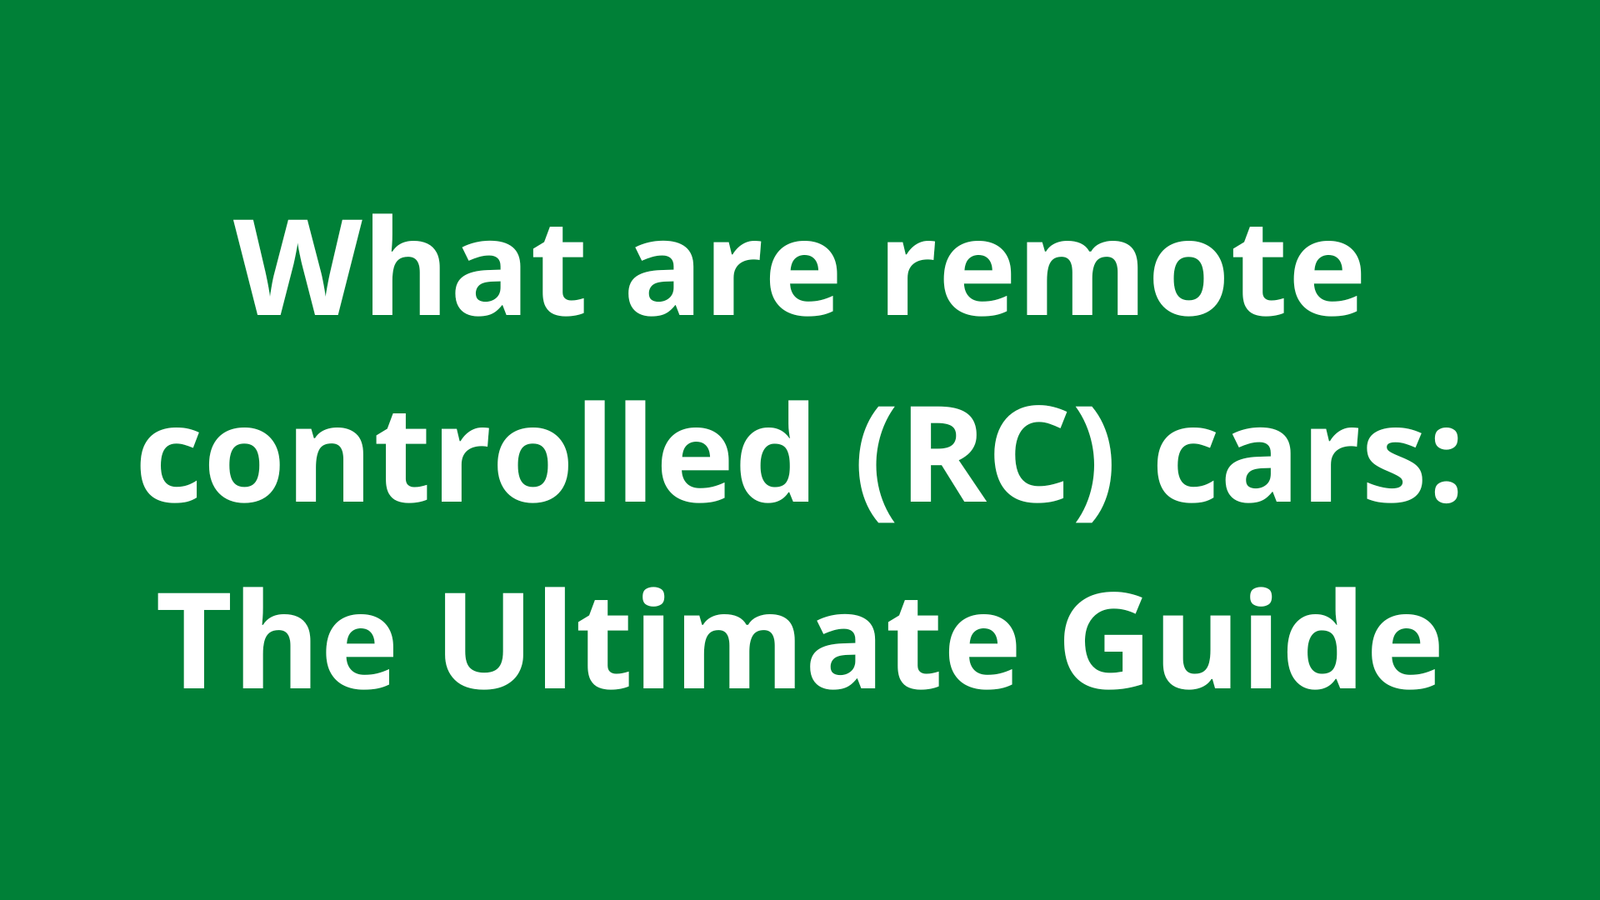 What are remote controlled (RC) cars: The Ultimate Guide